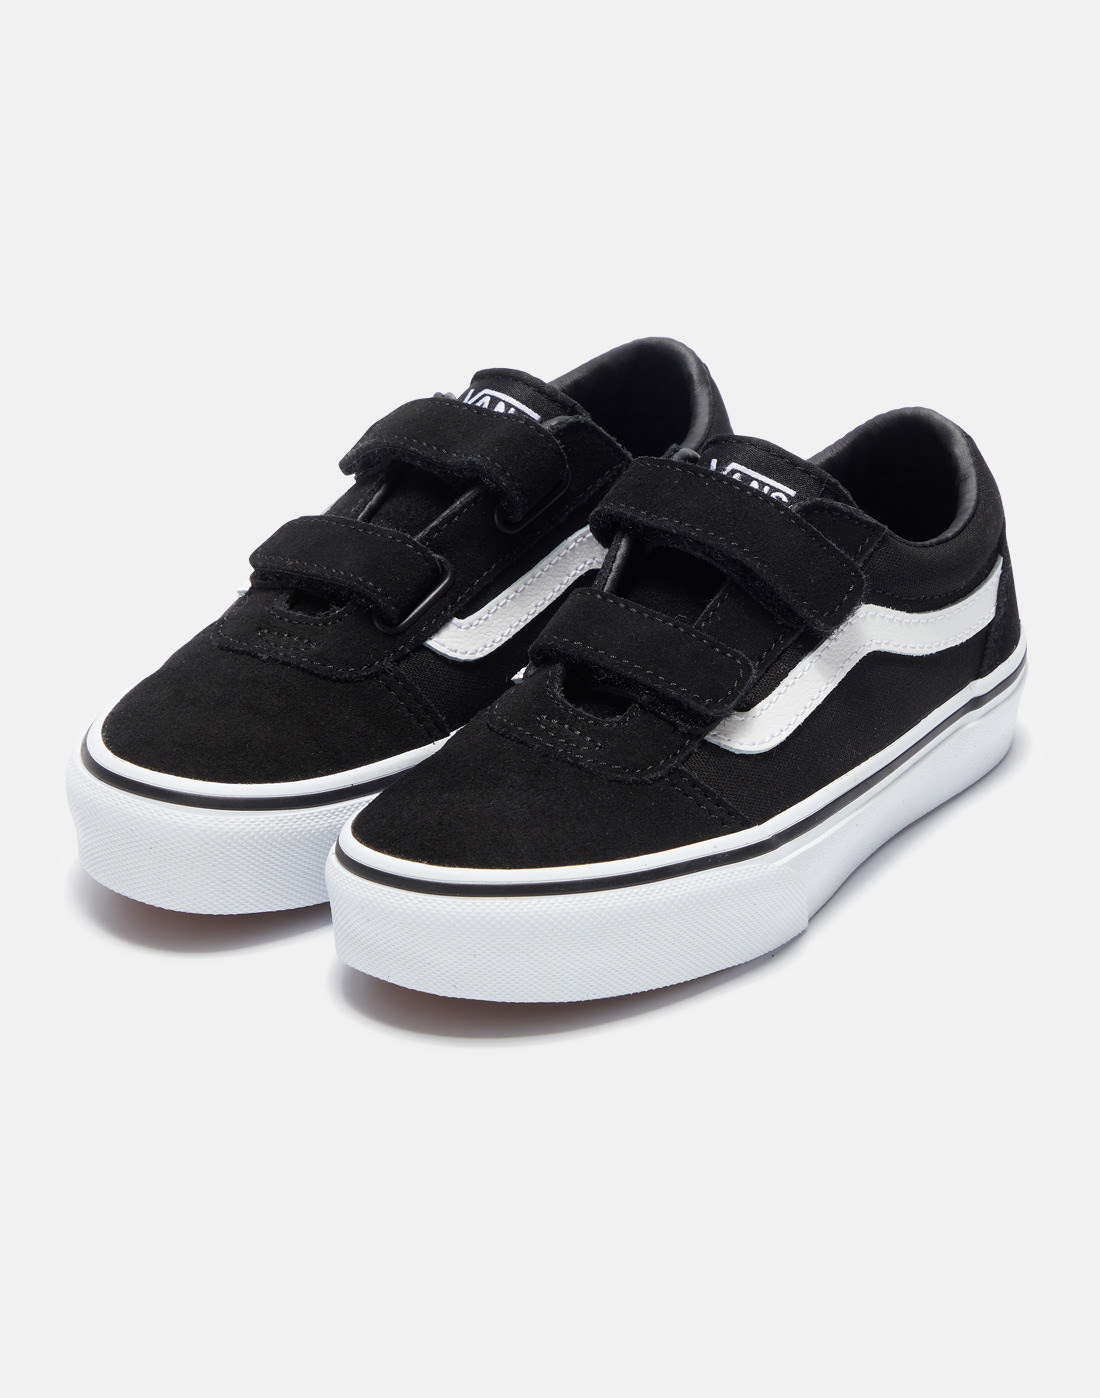 Vans Younger Kids Ward - Black | Life Style Sports IE